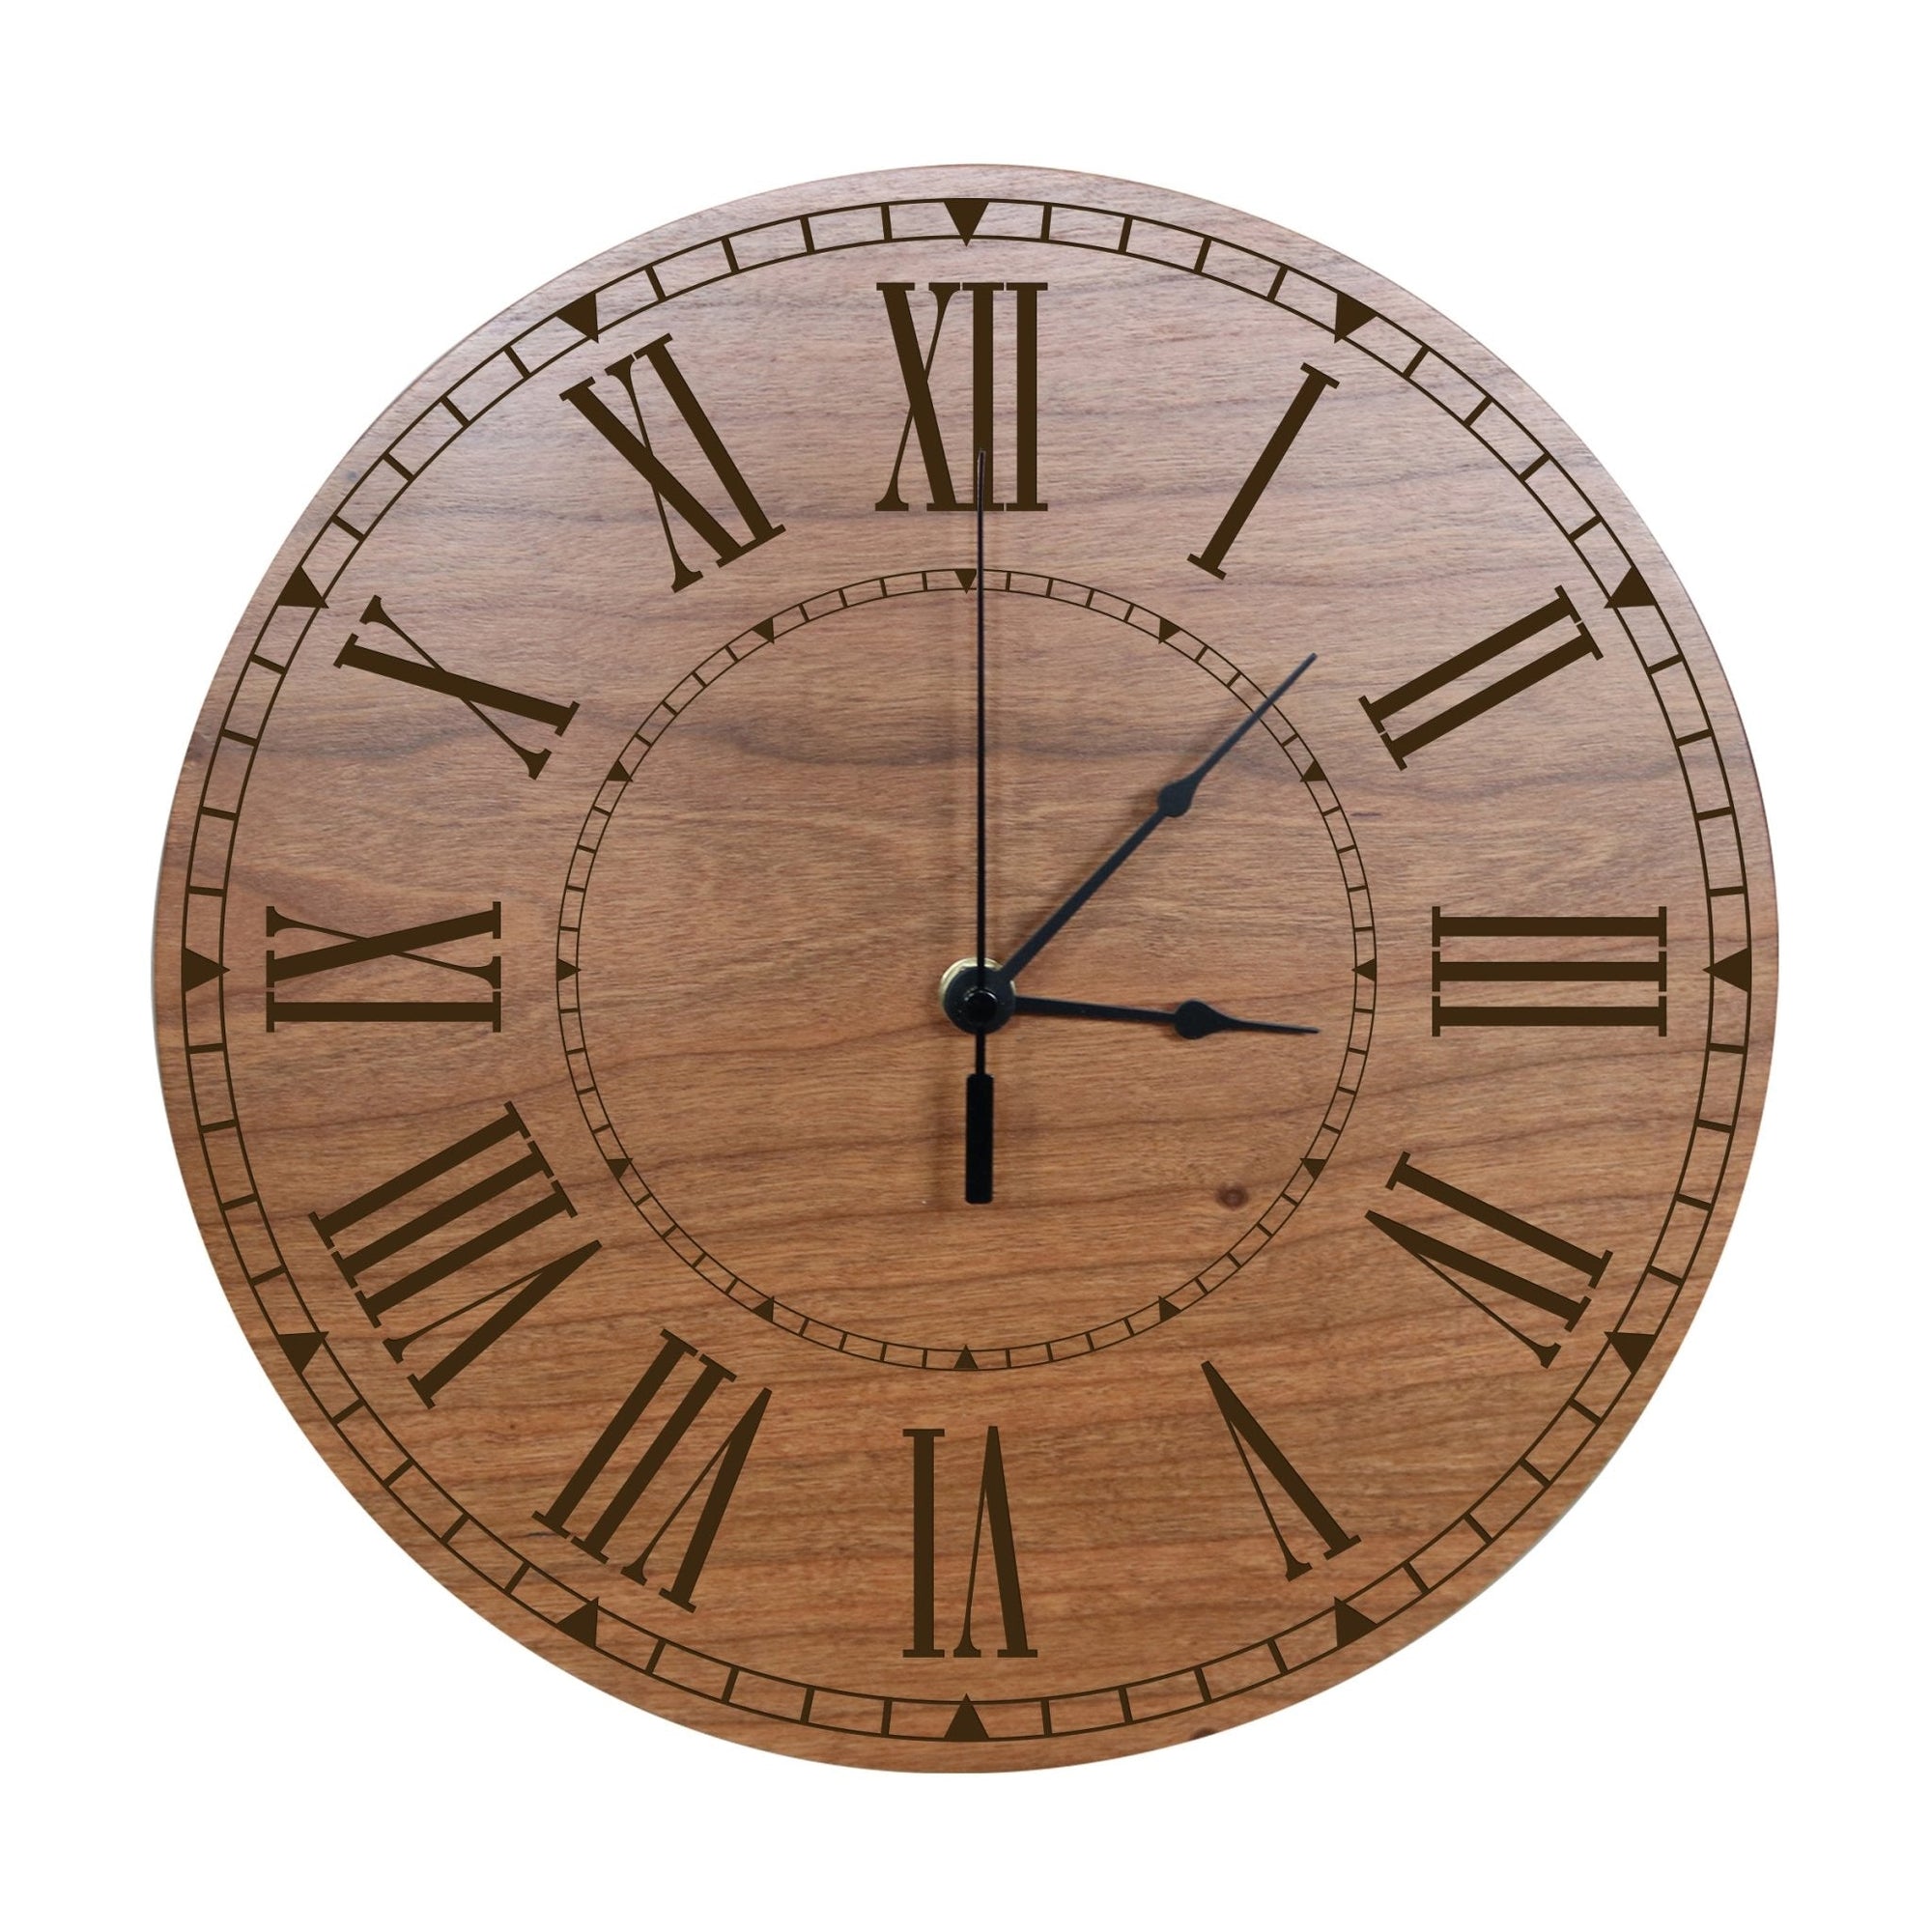 Personalized Engraved Wooden Wall Clock for 45th Wedding Anniversary Gift Ideas